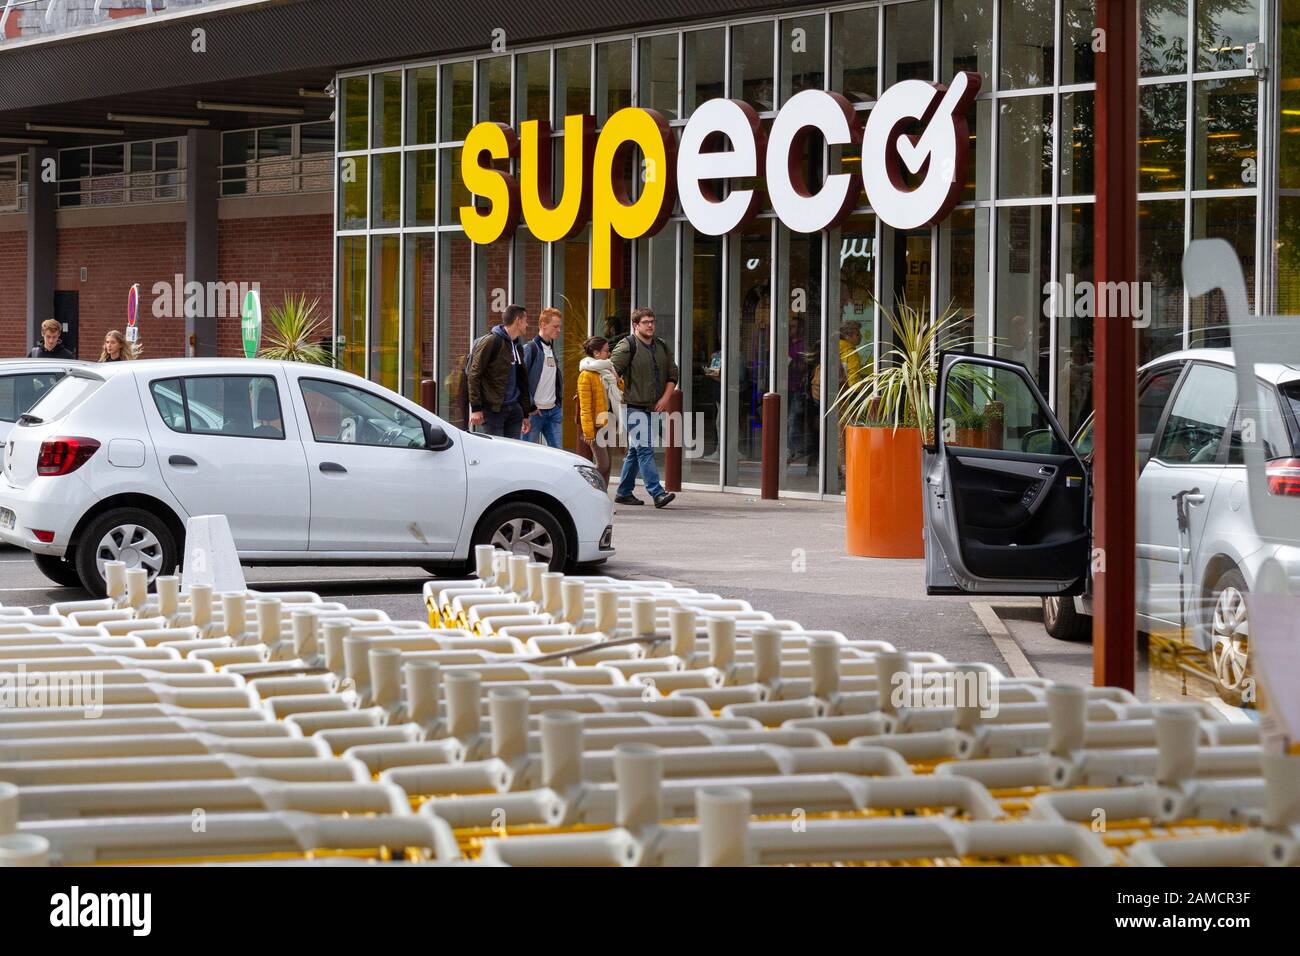 Rows of yellow branded shopping trolleys (carts) at a SUPECO supermarket in France. Stock Photo